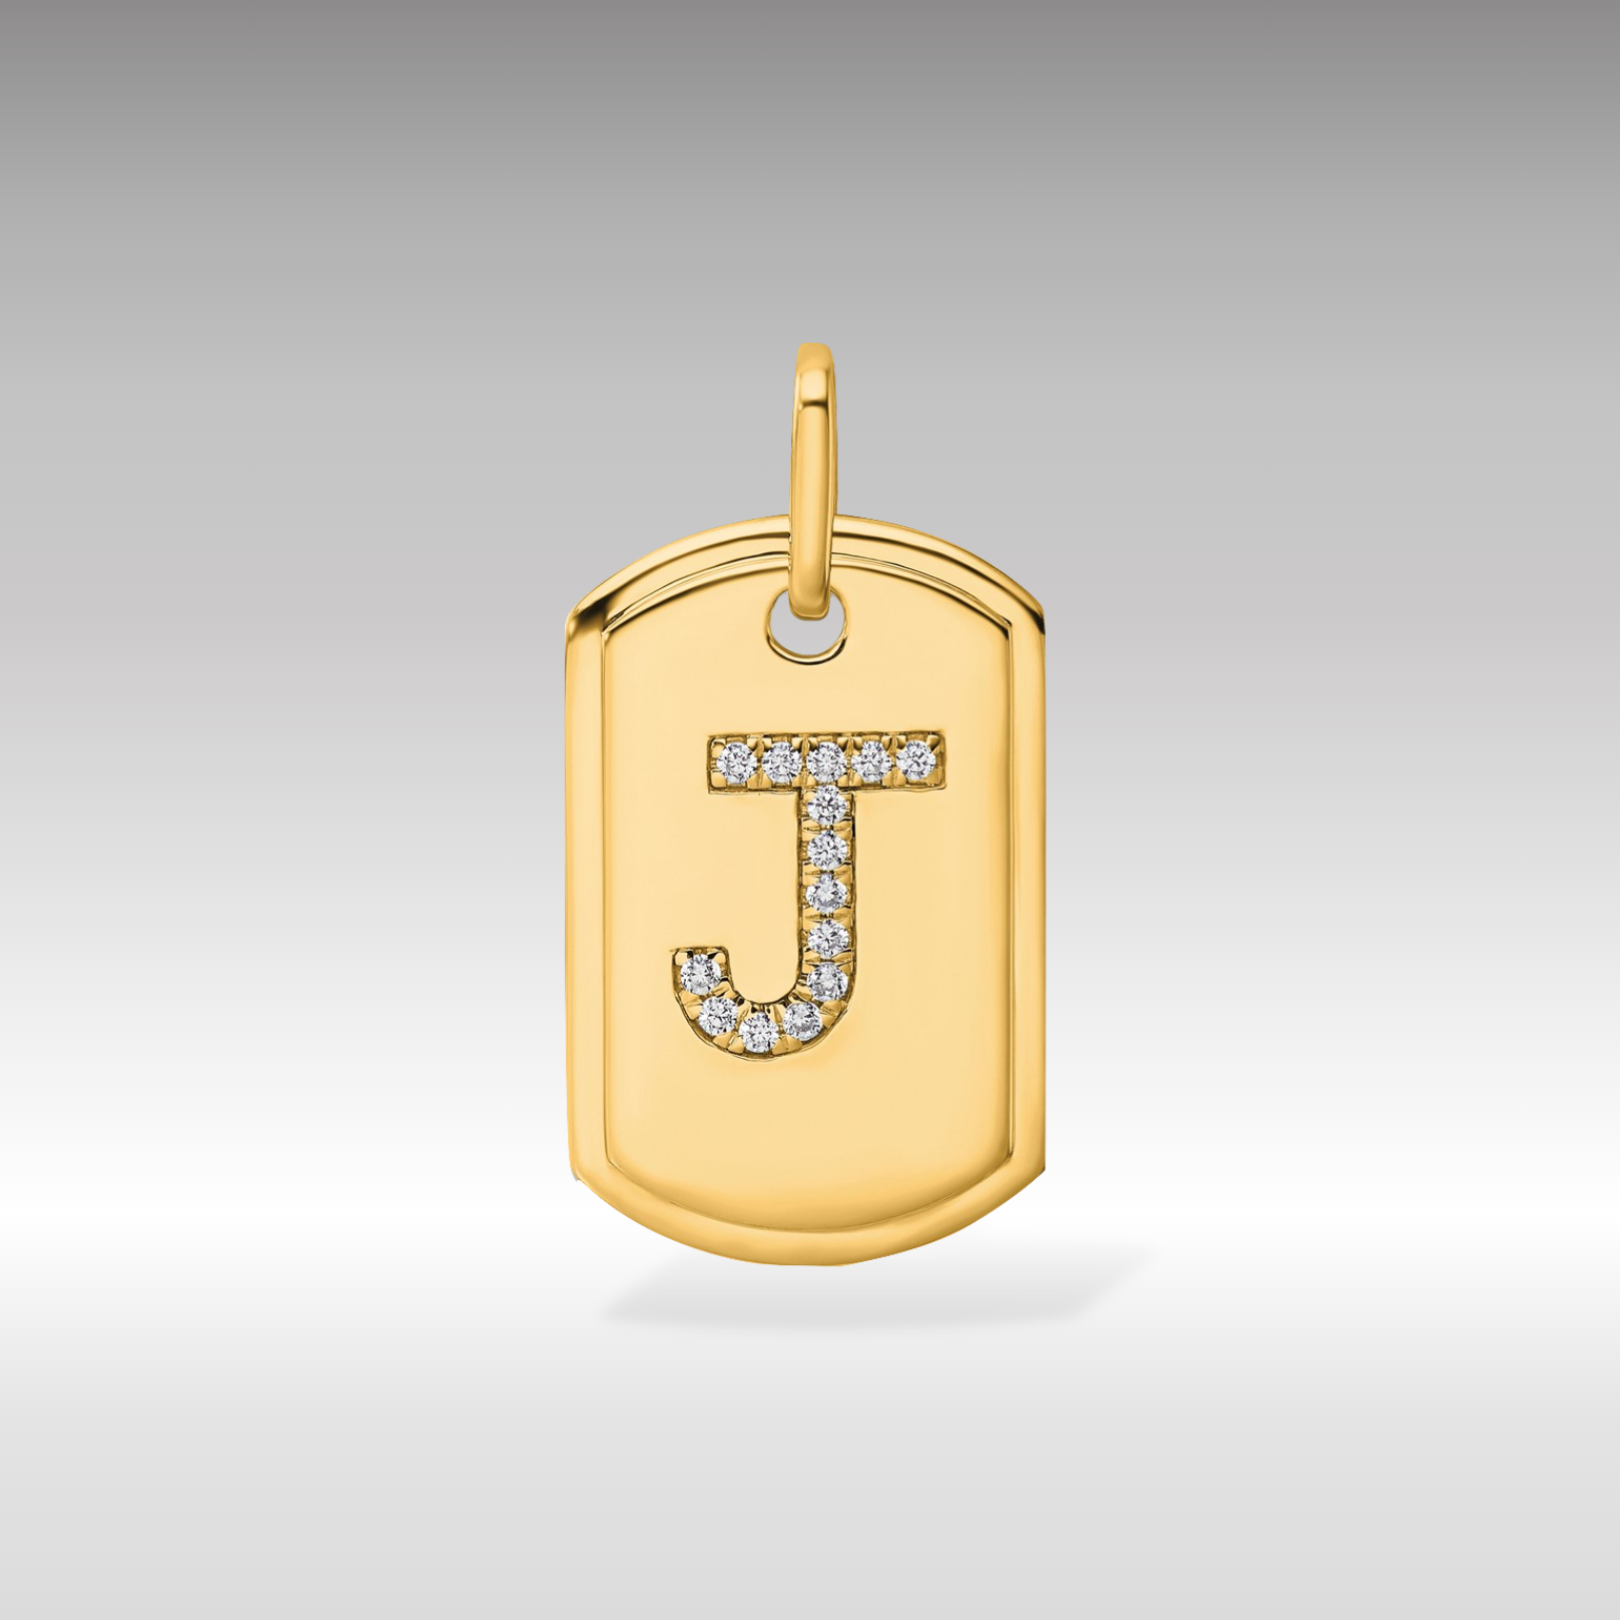 Gold Initial "J" Dog Tag With Diamonds - Charlie & Co. Jewelry